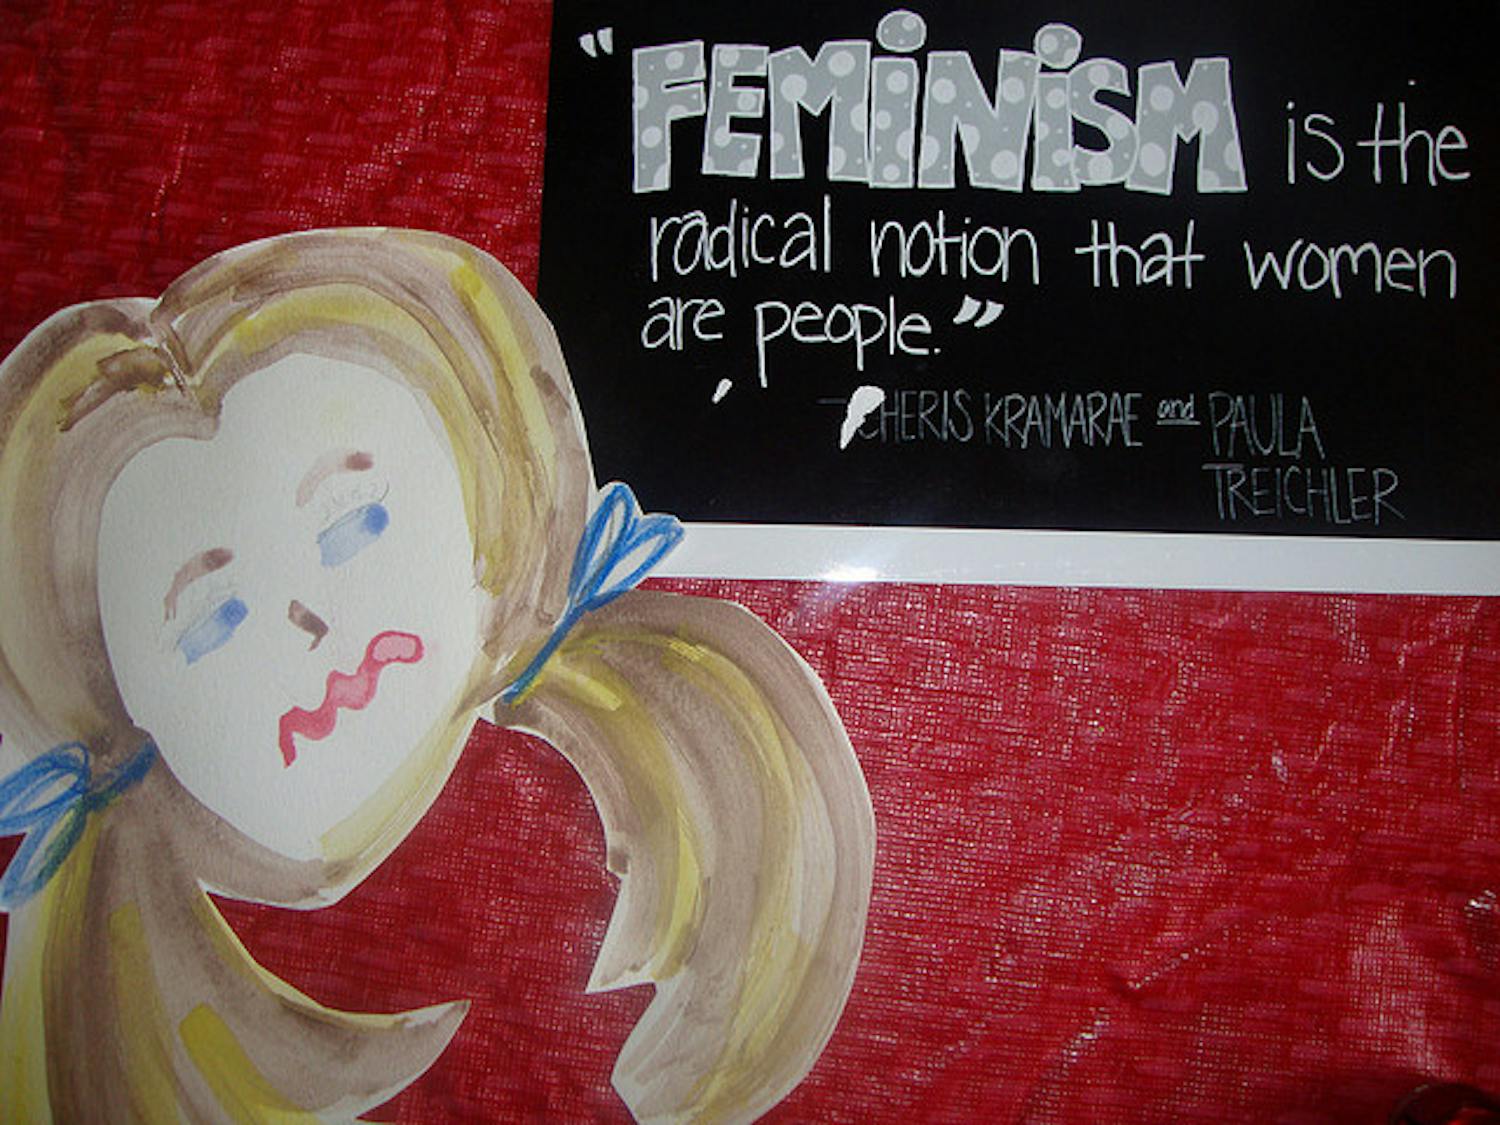 "Feminism, VDay 2007 and Me" by Julie Jordan Scott, used under CC BY 2.0